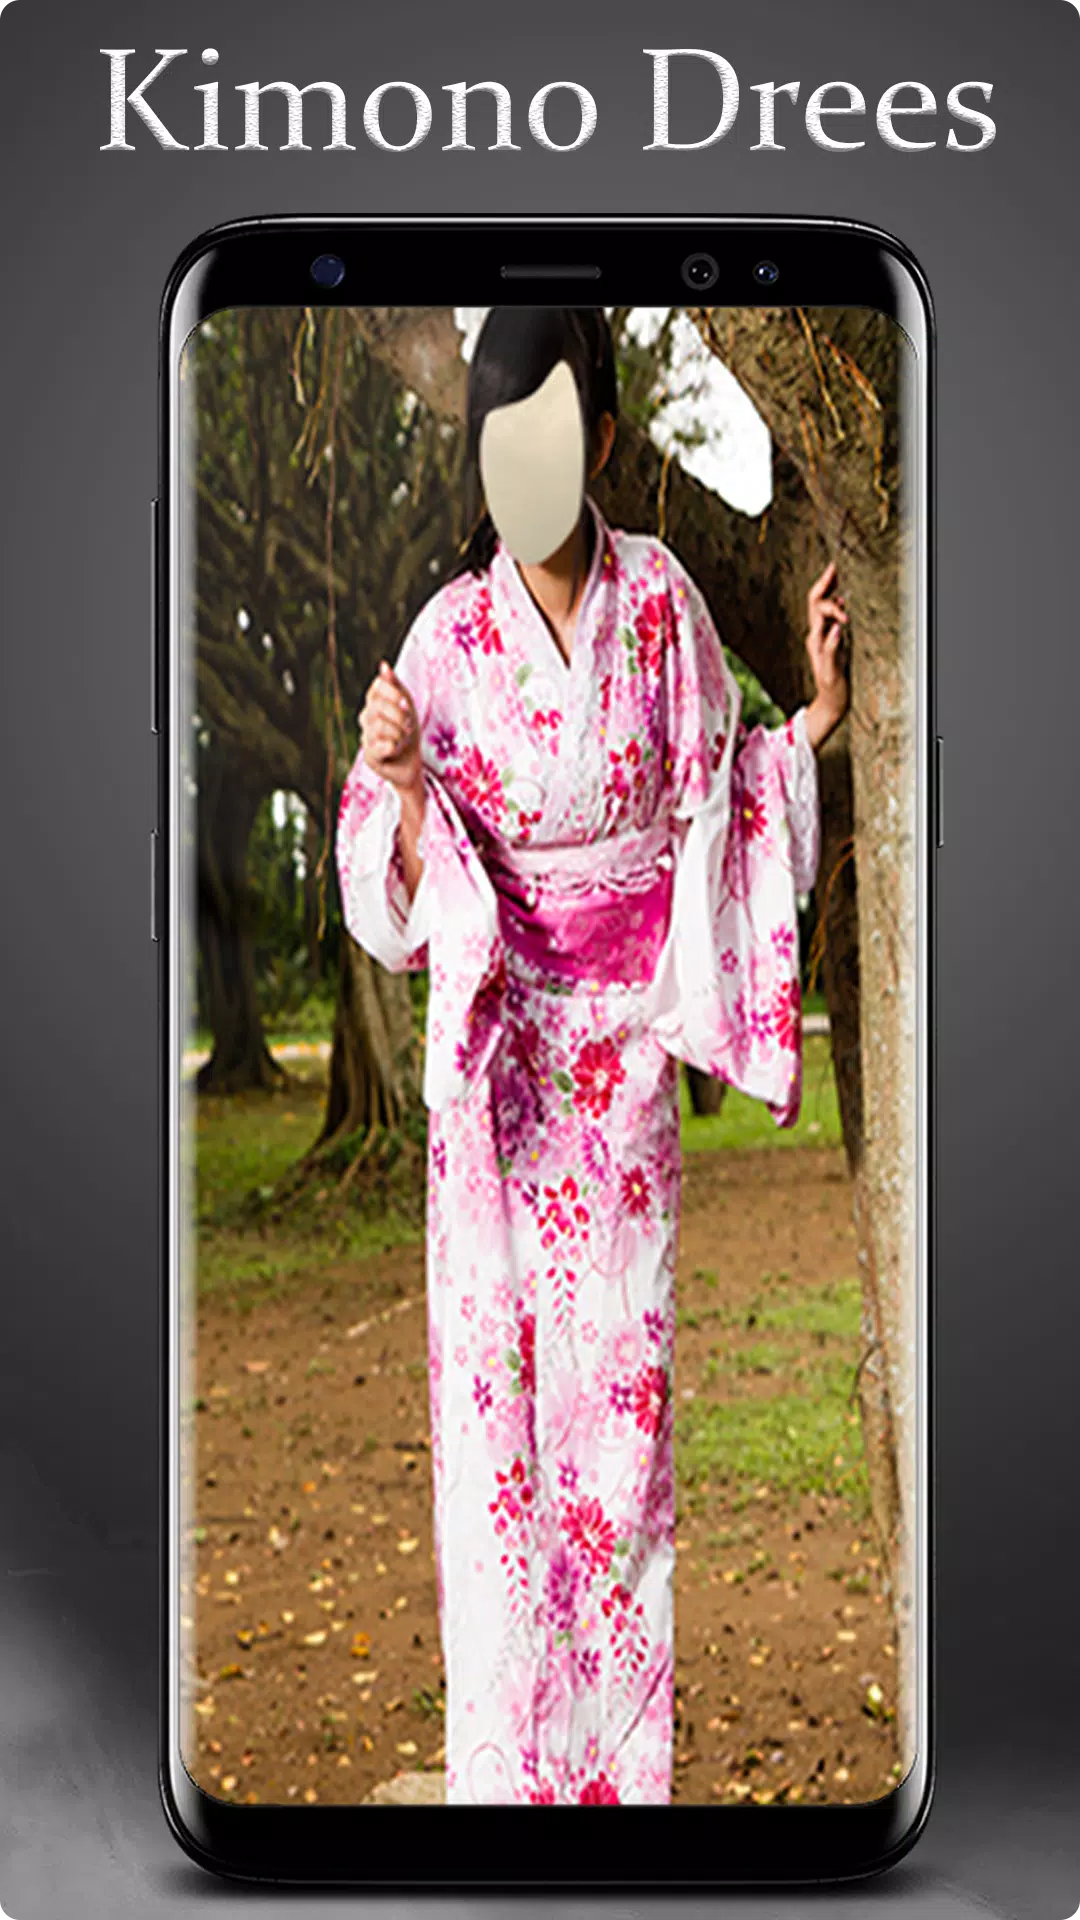 Kimono Dress Photo Suit Editor APK for Android Download